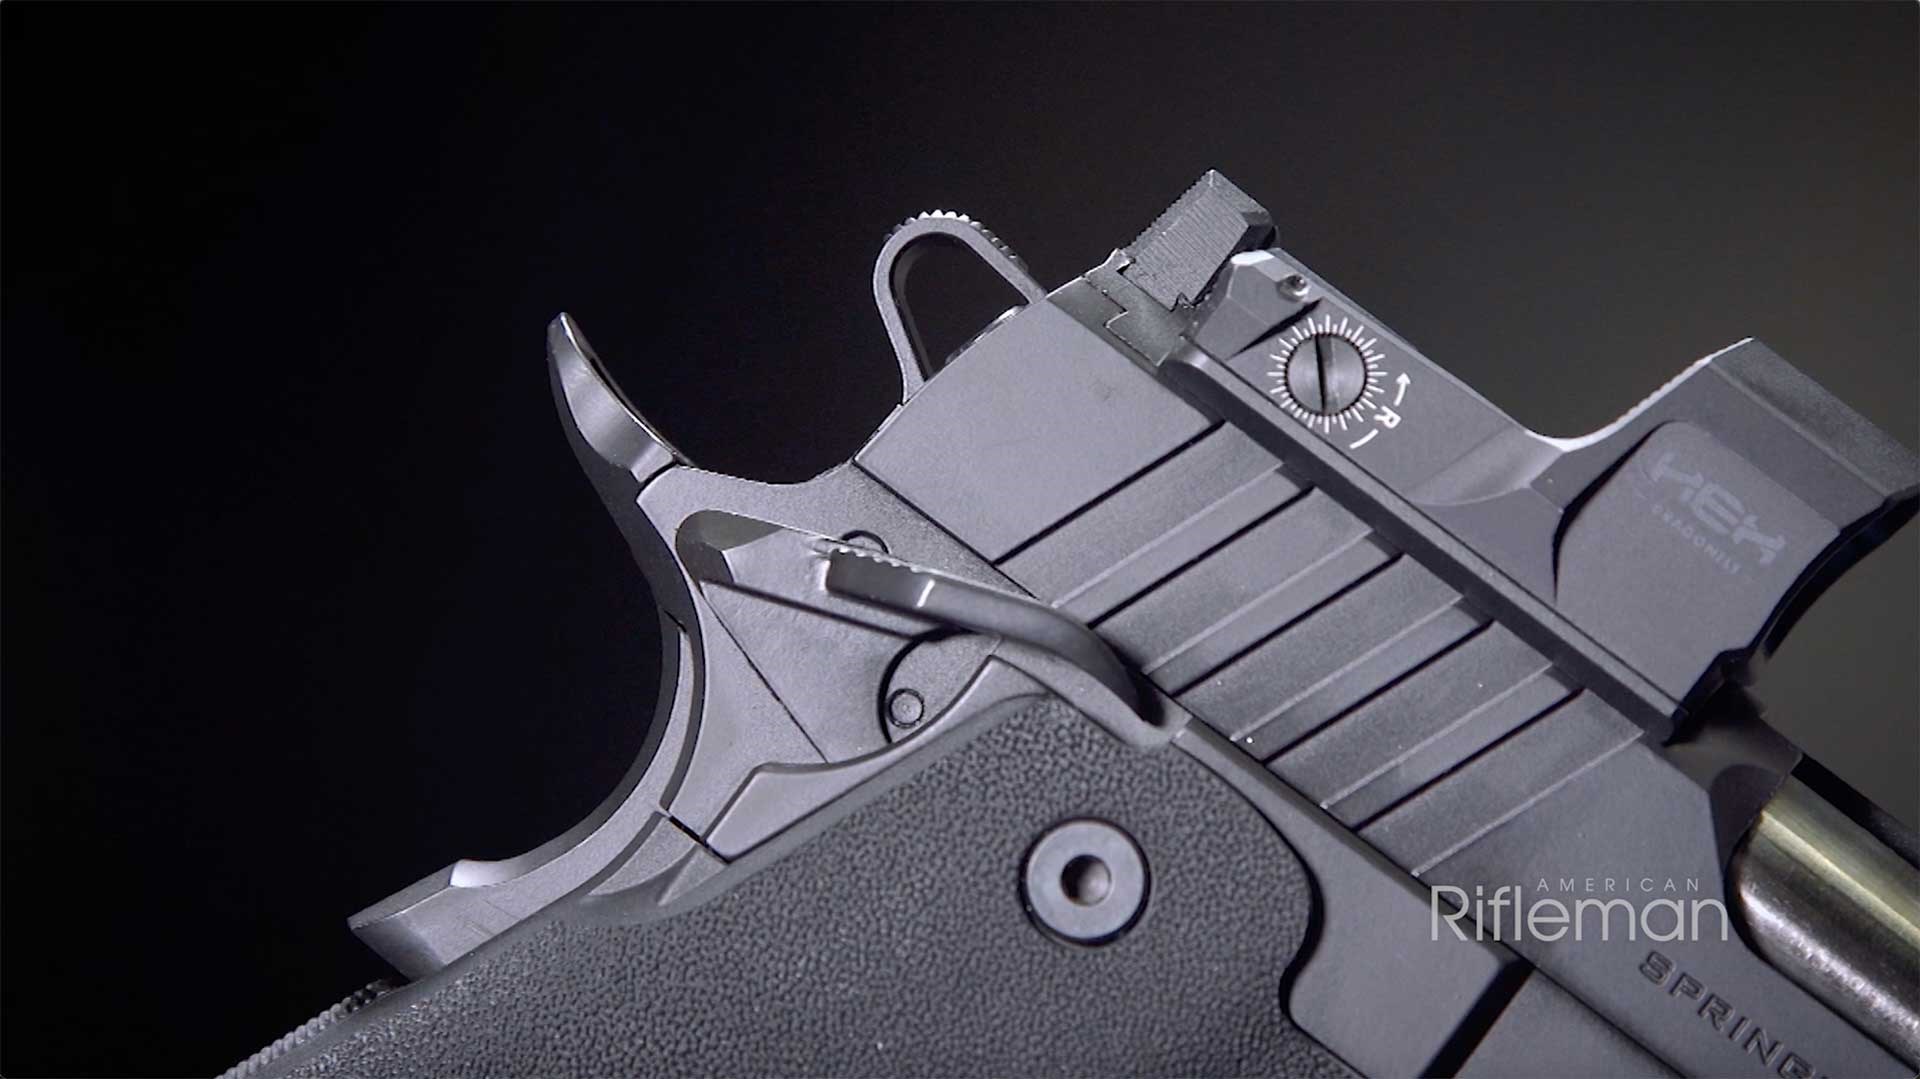 Skeletonized hammer, beavertail grip safety and right-side thumb safety located at the top-rear of the Springfield Armory Prodigy pistol.